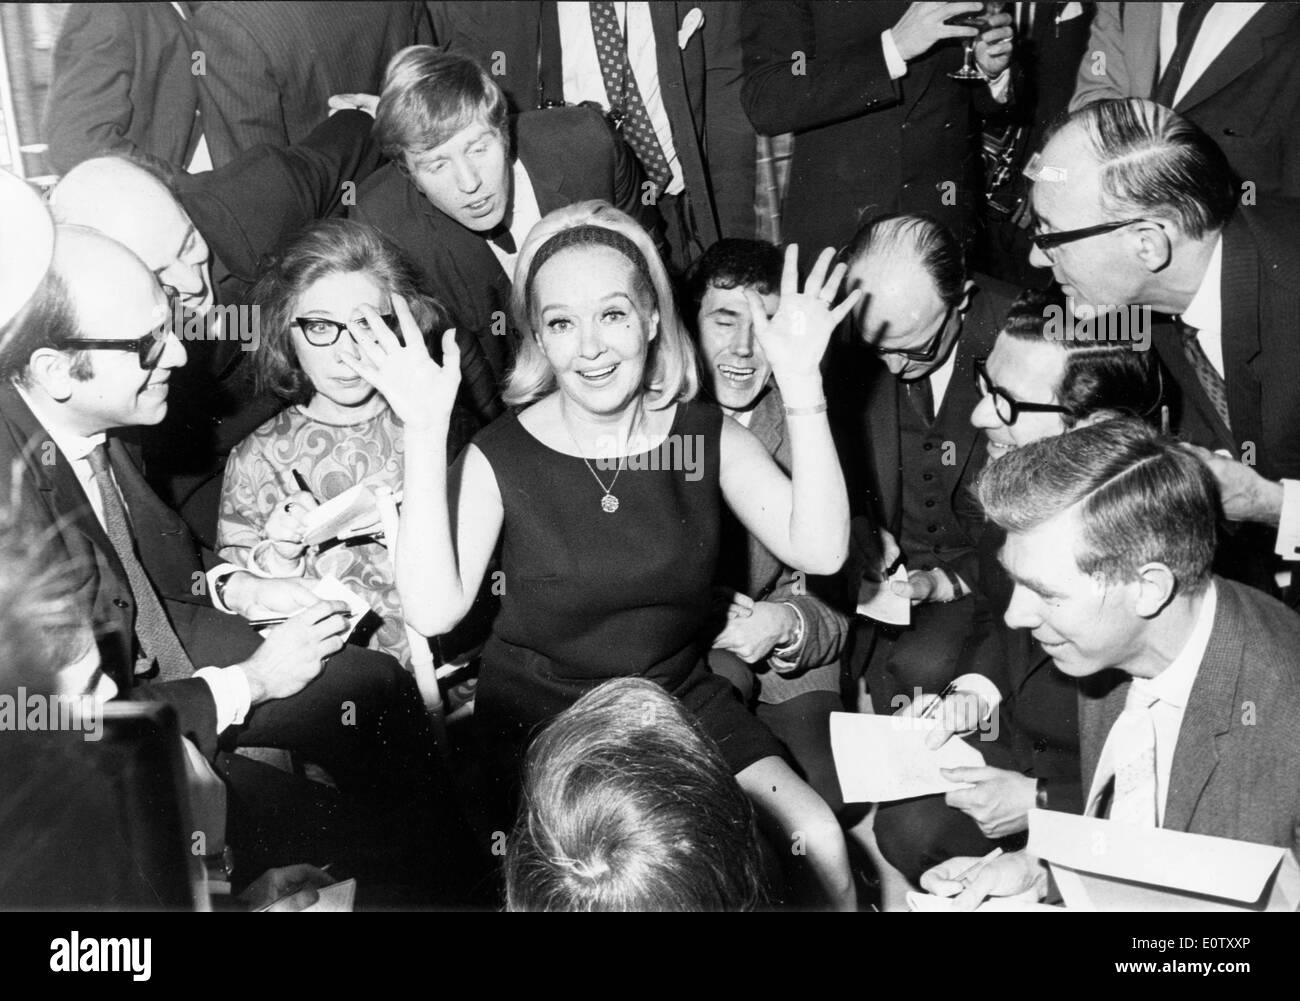 Actress Betty Grable surrounded by people and fans at an event Stock Photo